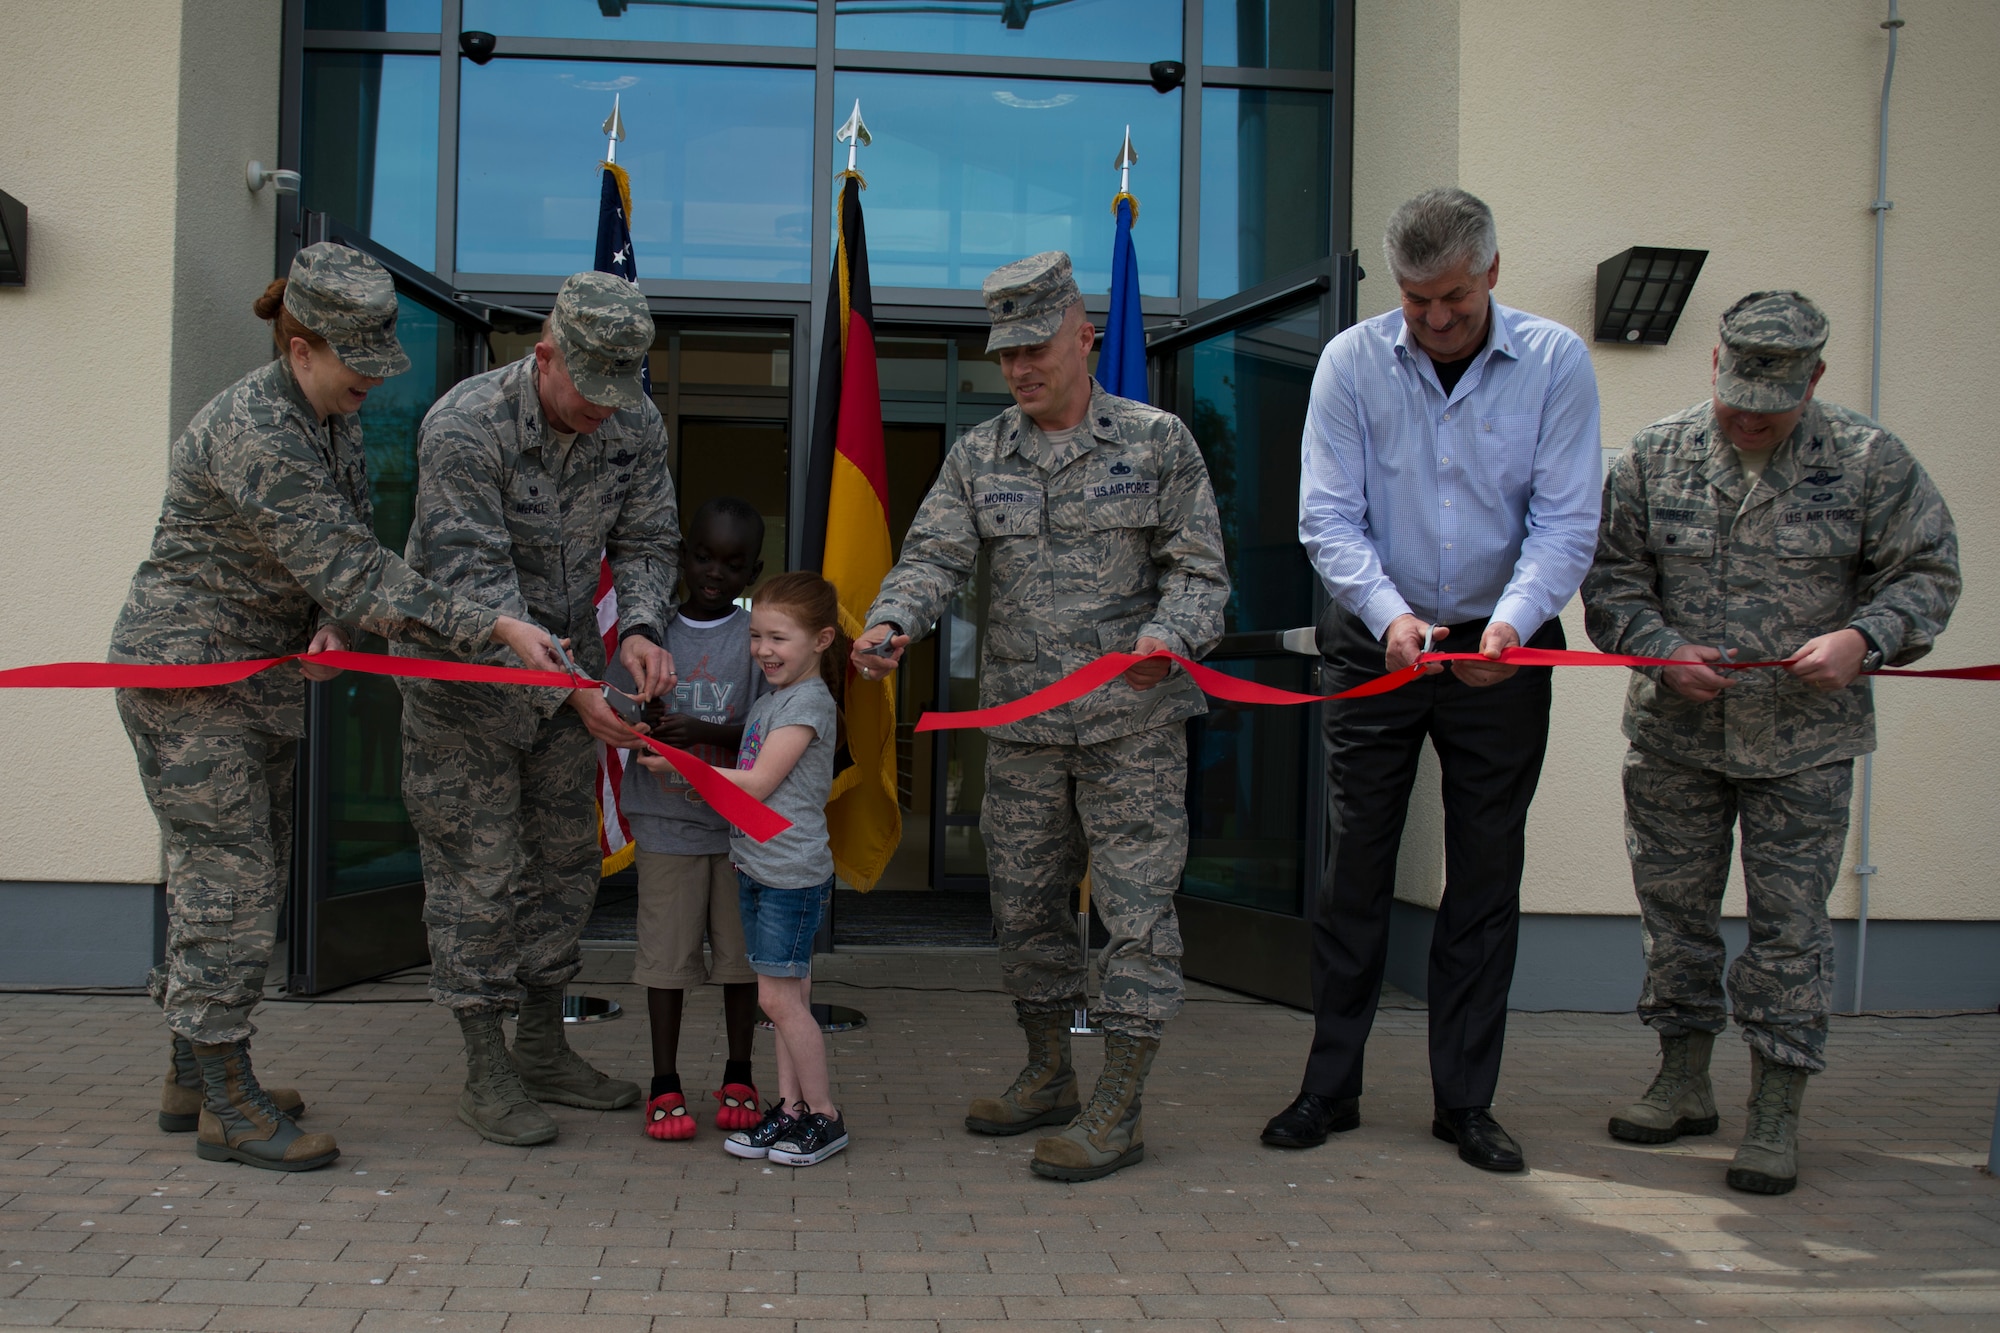 Leadership of the 52nd Fighter Wing and community members perform a ribbon cutting ceremony during the official opening of the new child development center at Spangdahlem Air Base, Germany, May 11, 2015. The new facility can support more than 200 children ages 1-5 and includes a lobby, playground, kitchen and 11 classrooms. (U.S. Air Force photo by Airman 1st Class Luke Kitterman/Released)